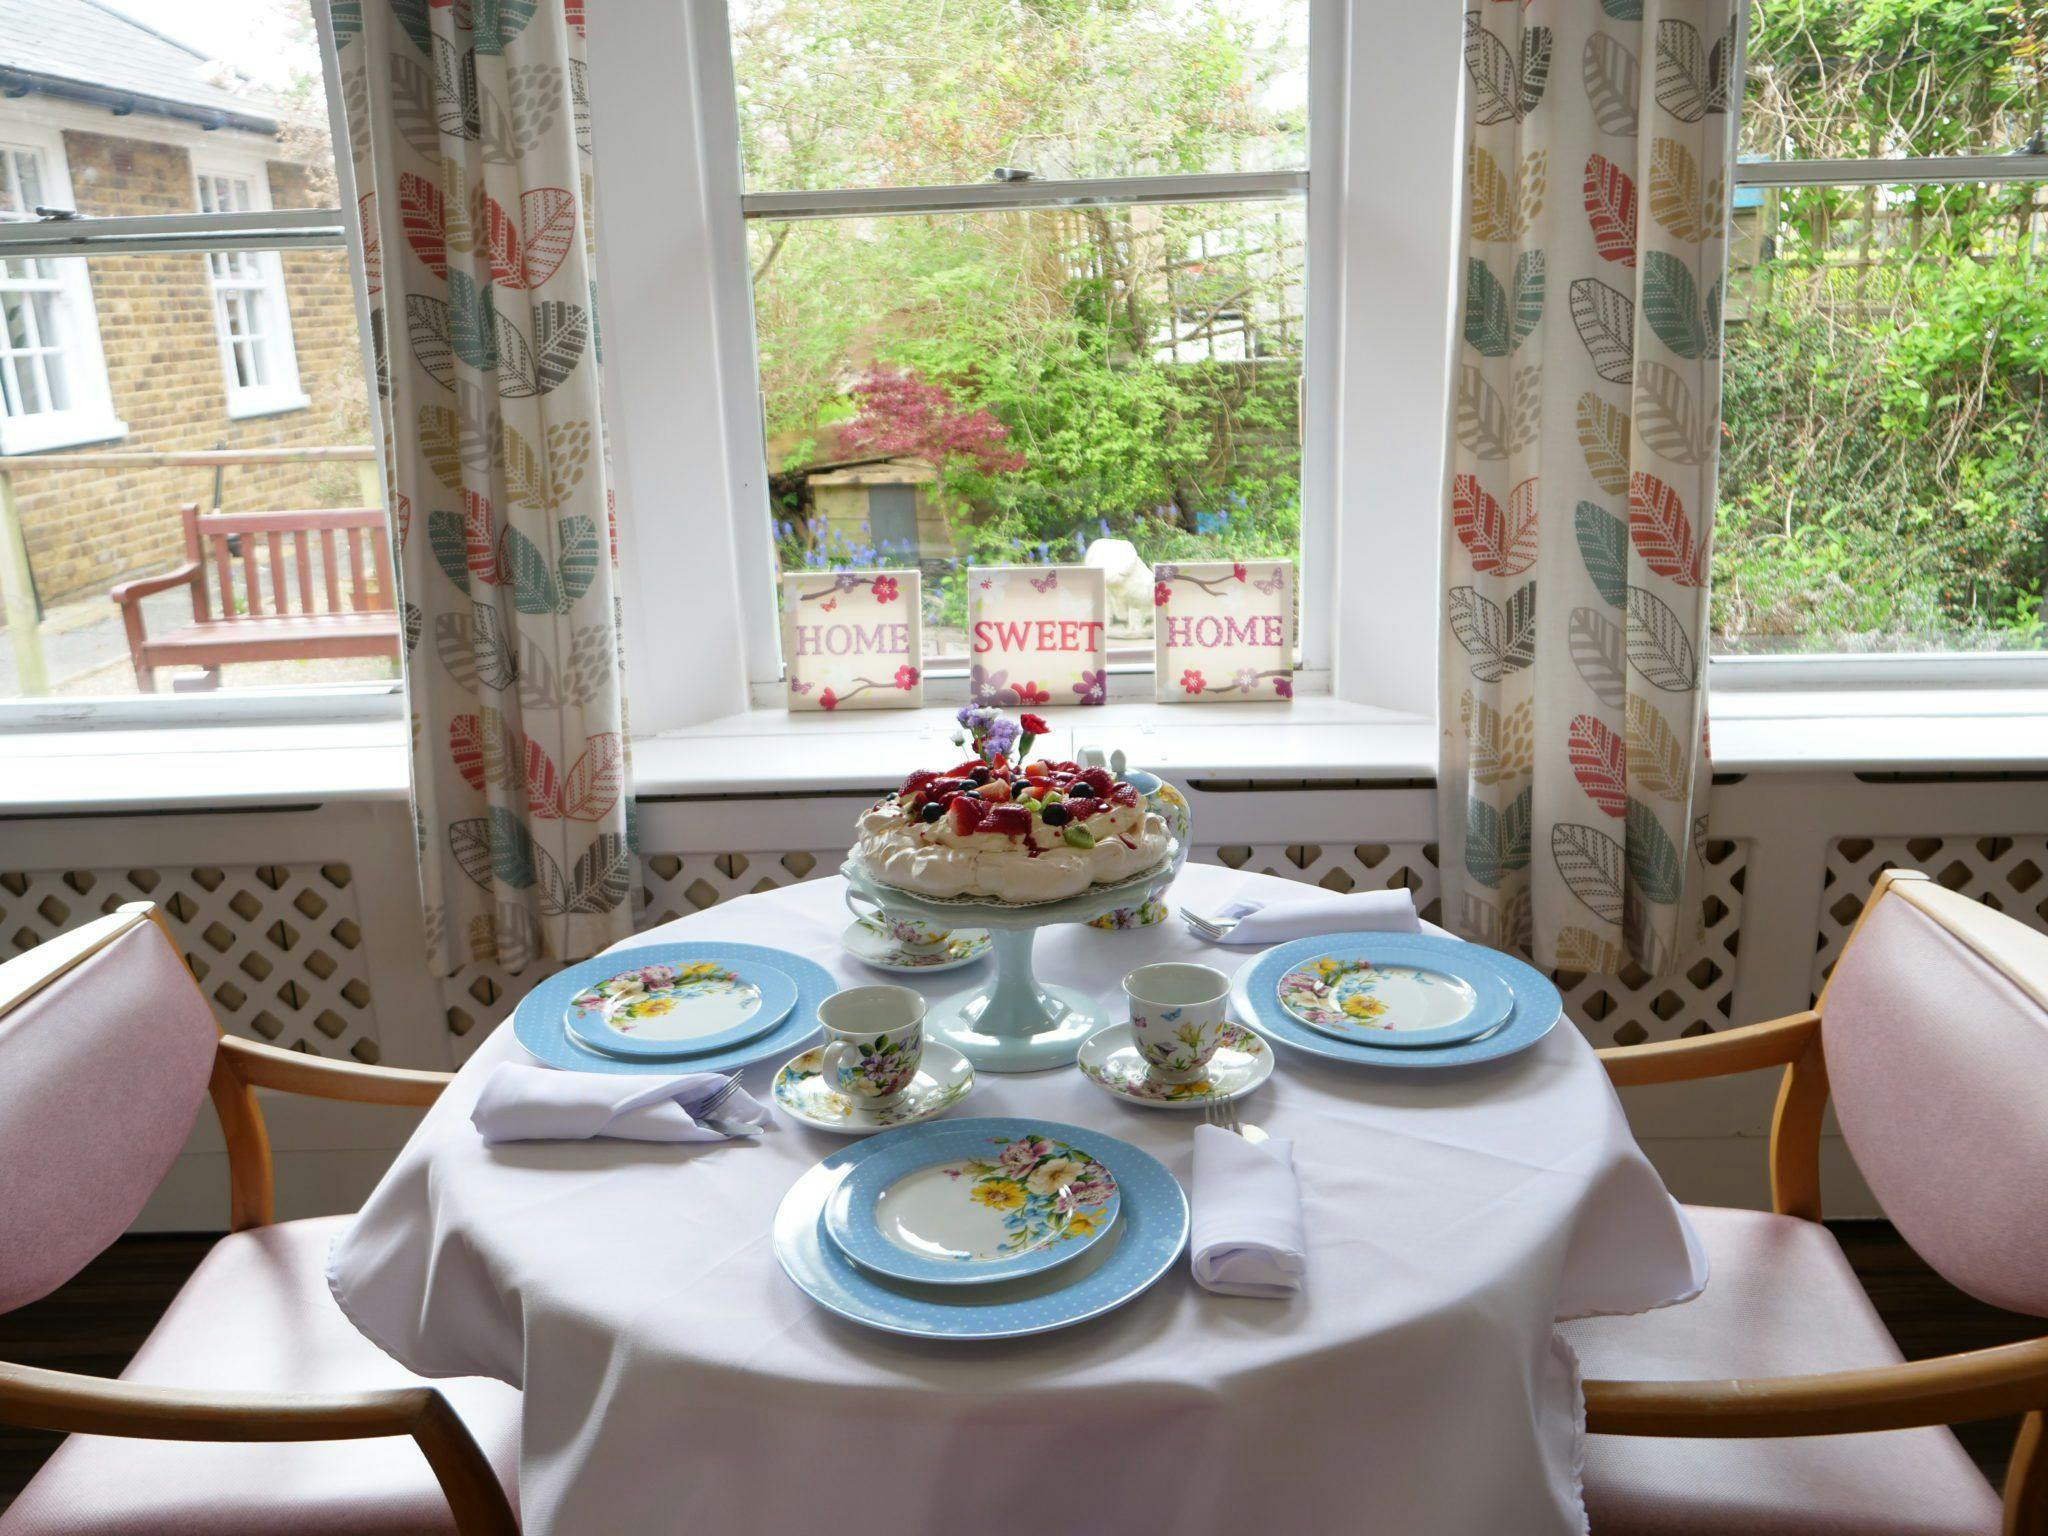 Dining area of Hartley House care home in Cranbrook, Kent,